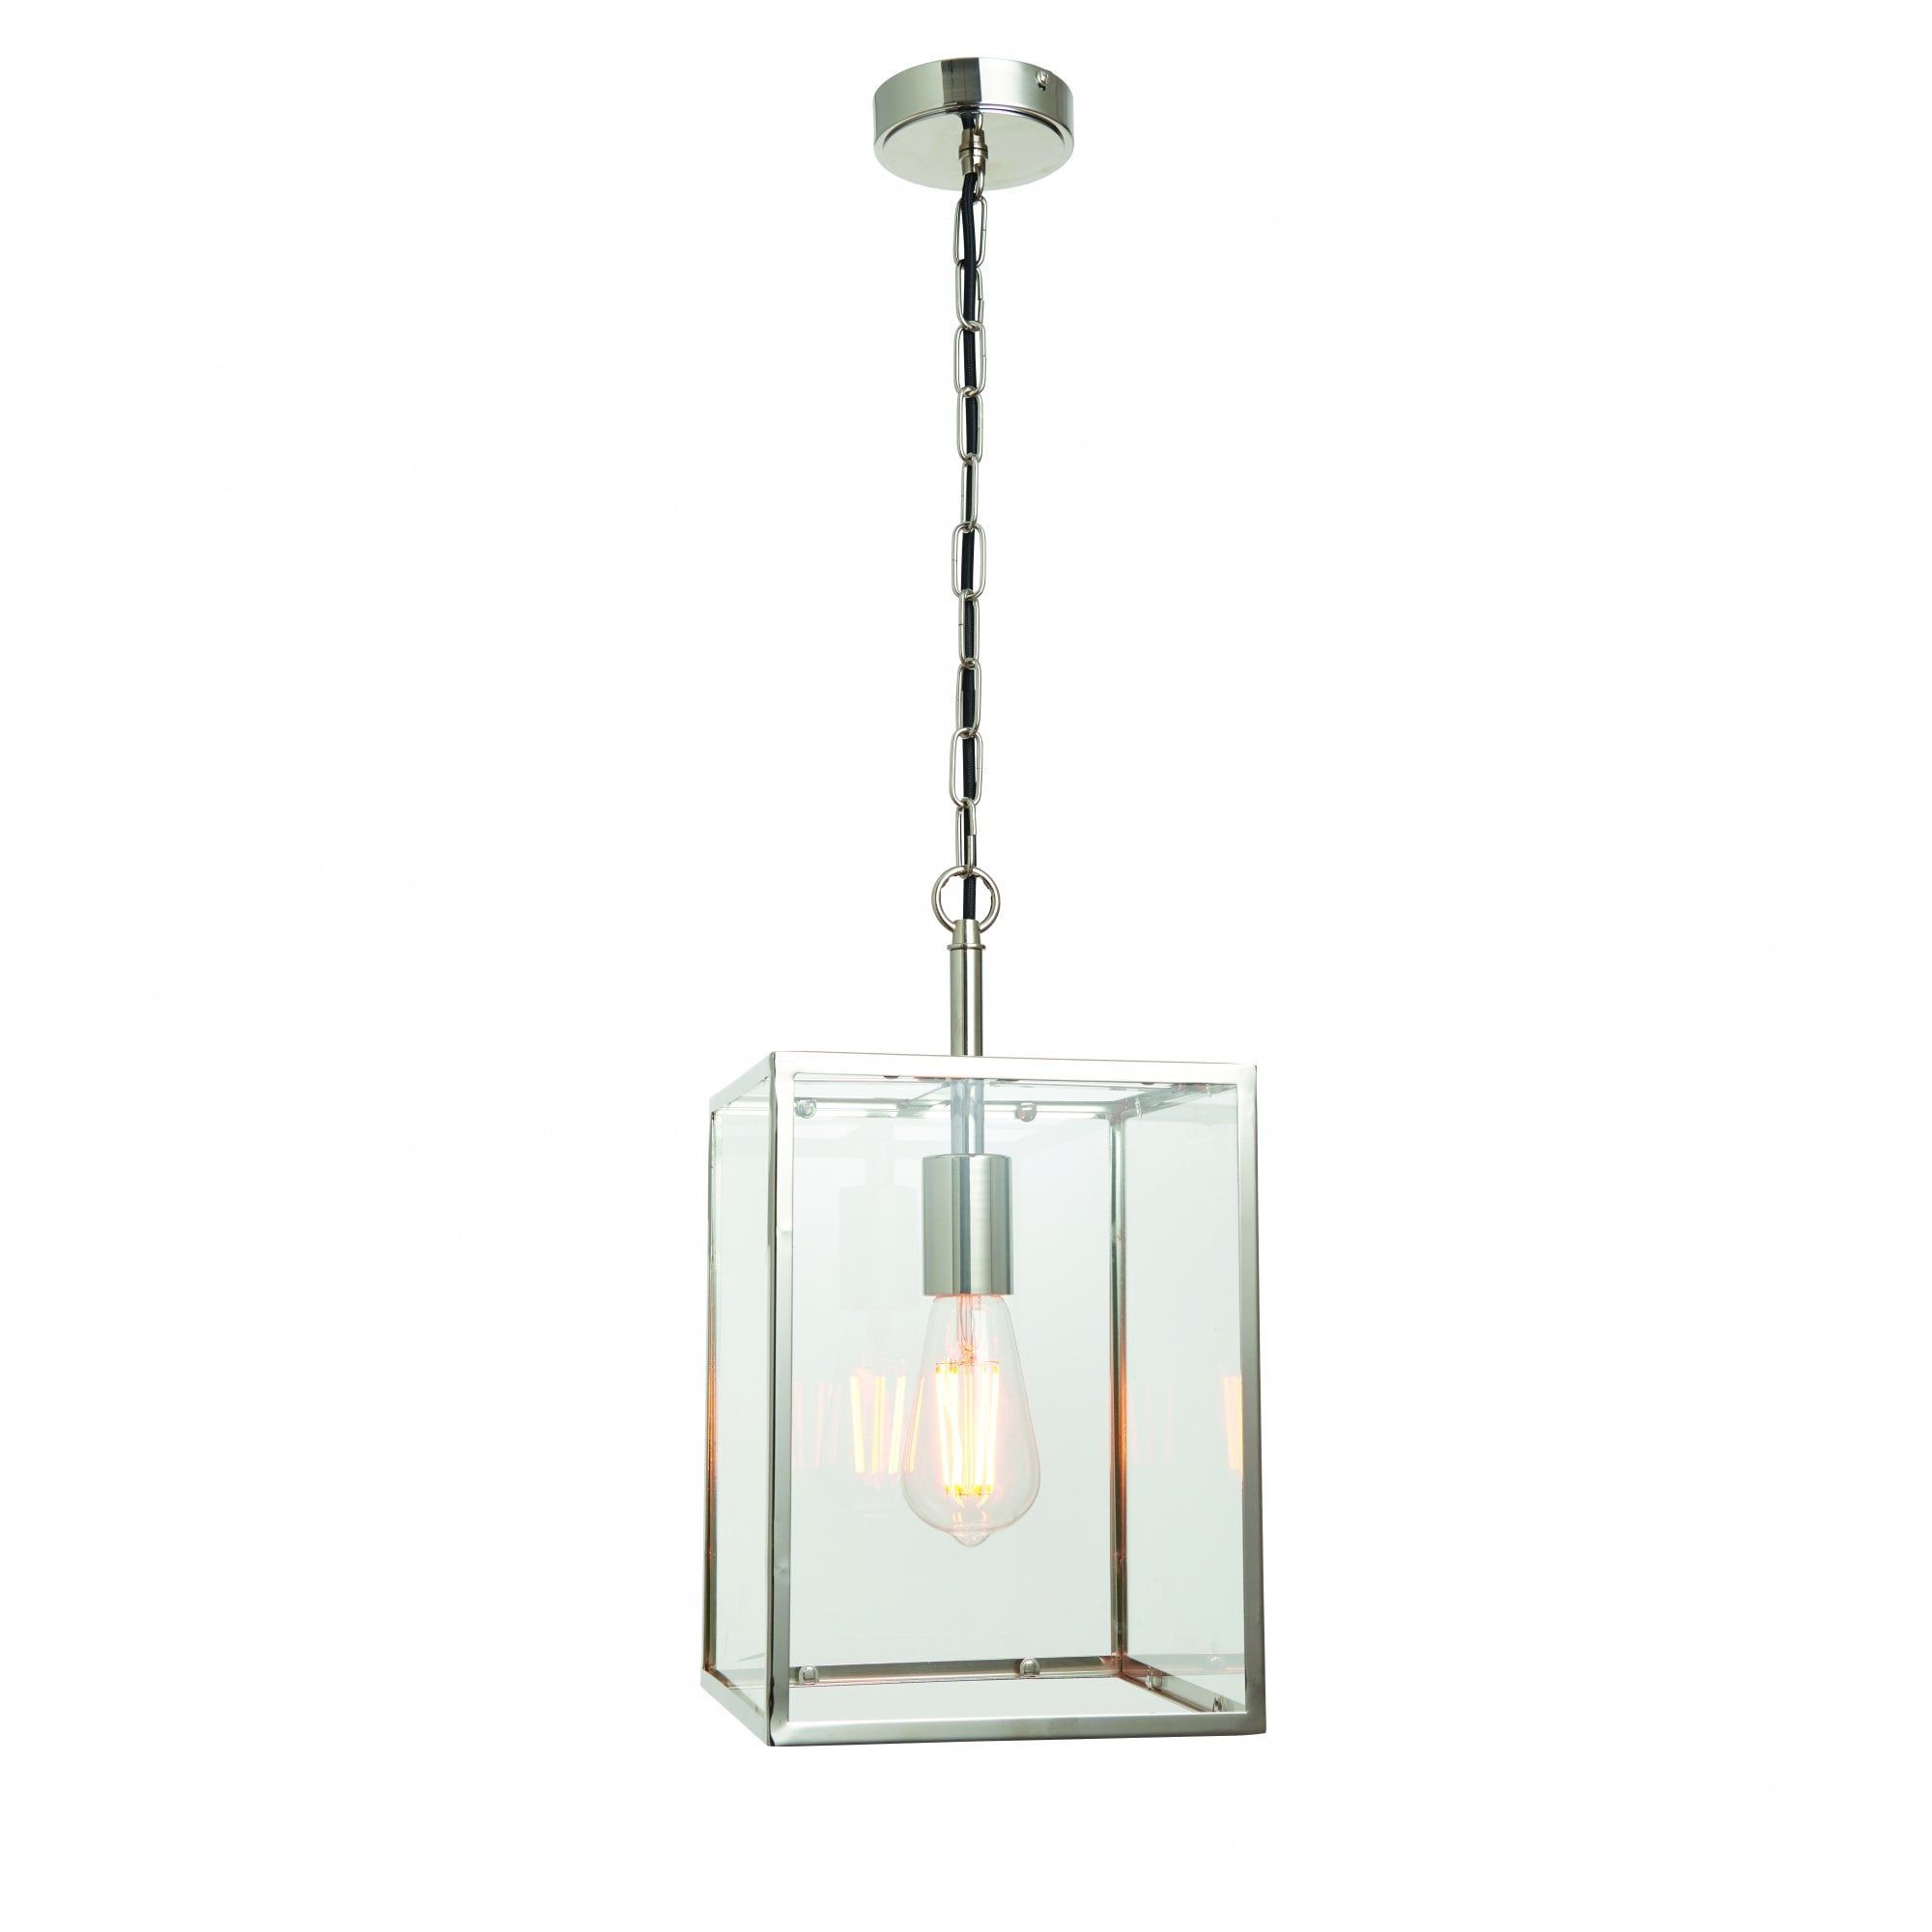 Pendant 40w Bright Nickel Plate & Clear Glass Within Lantern Chandeliers With Clear Glass (View 3 of 15)